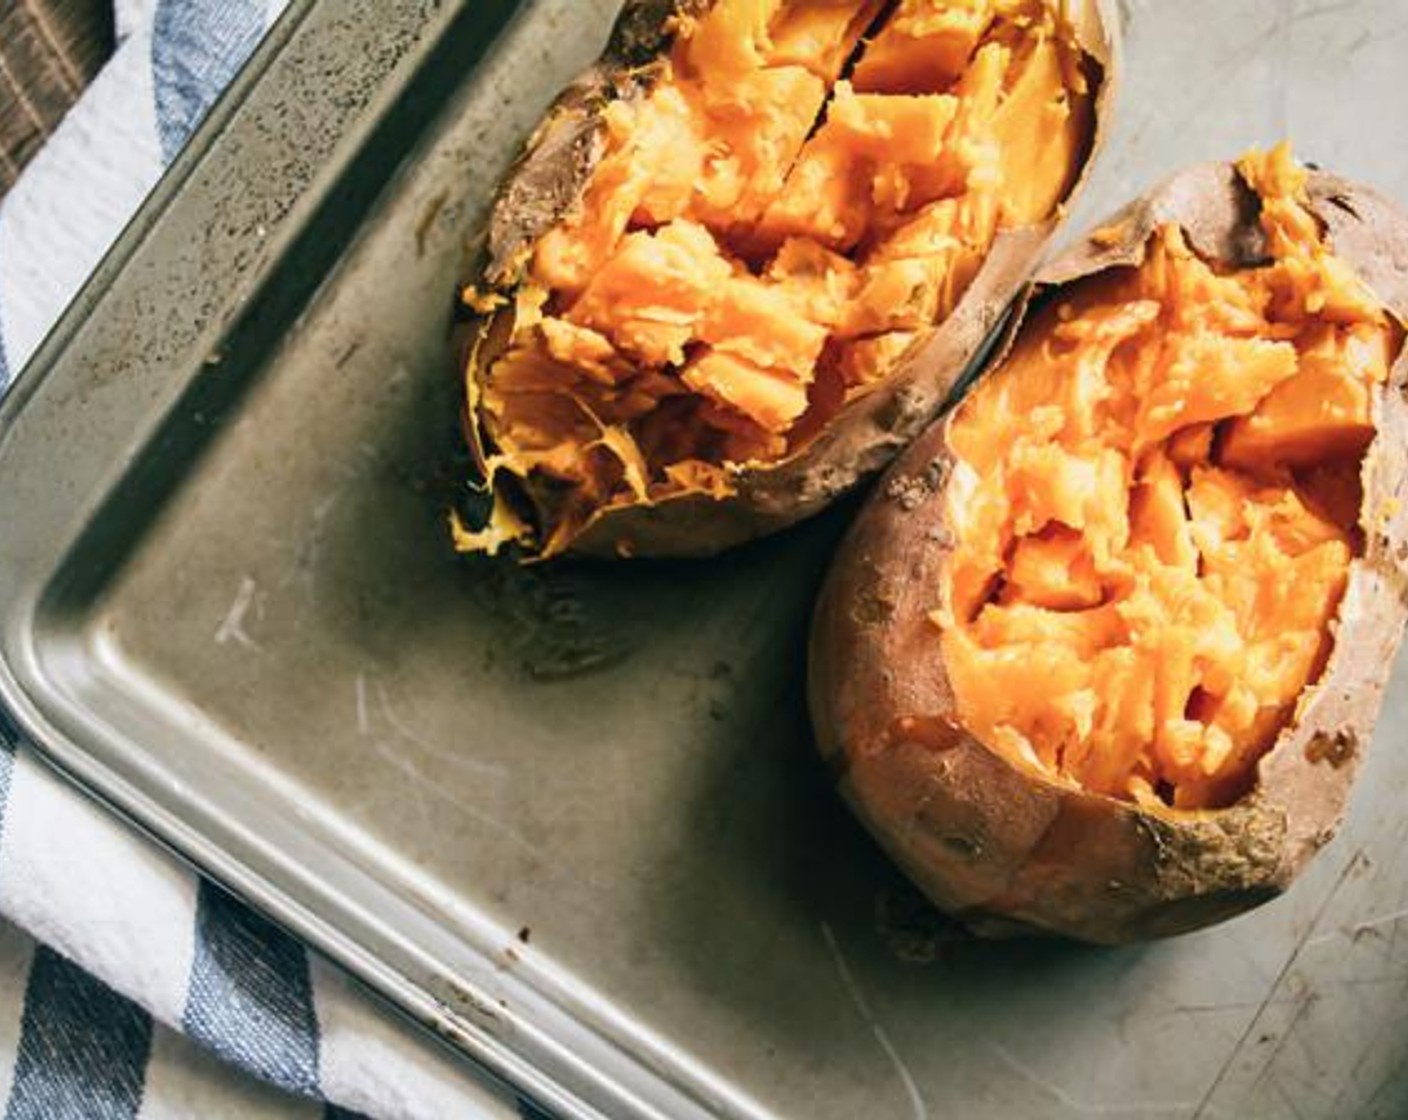 step 6 Once the sweet potatoes are cooked, allow to cool for a few minutes, then cut off tops and scoop out the cooked flesh of each potato, add to a large bowl. Leave the skin of the potatoes intact along with a thin layer of potato to help hold skins together.